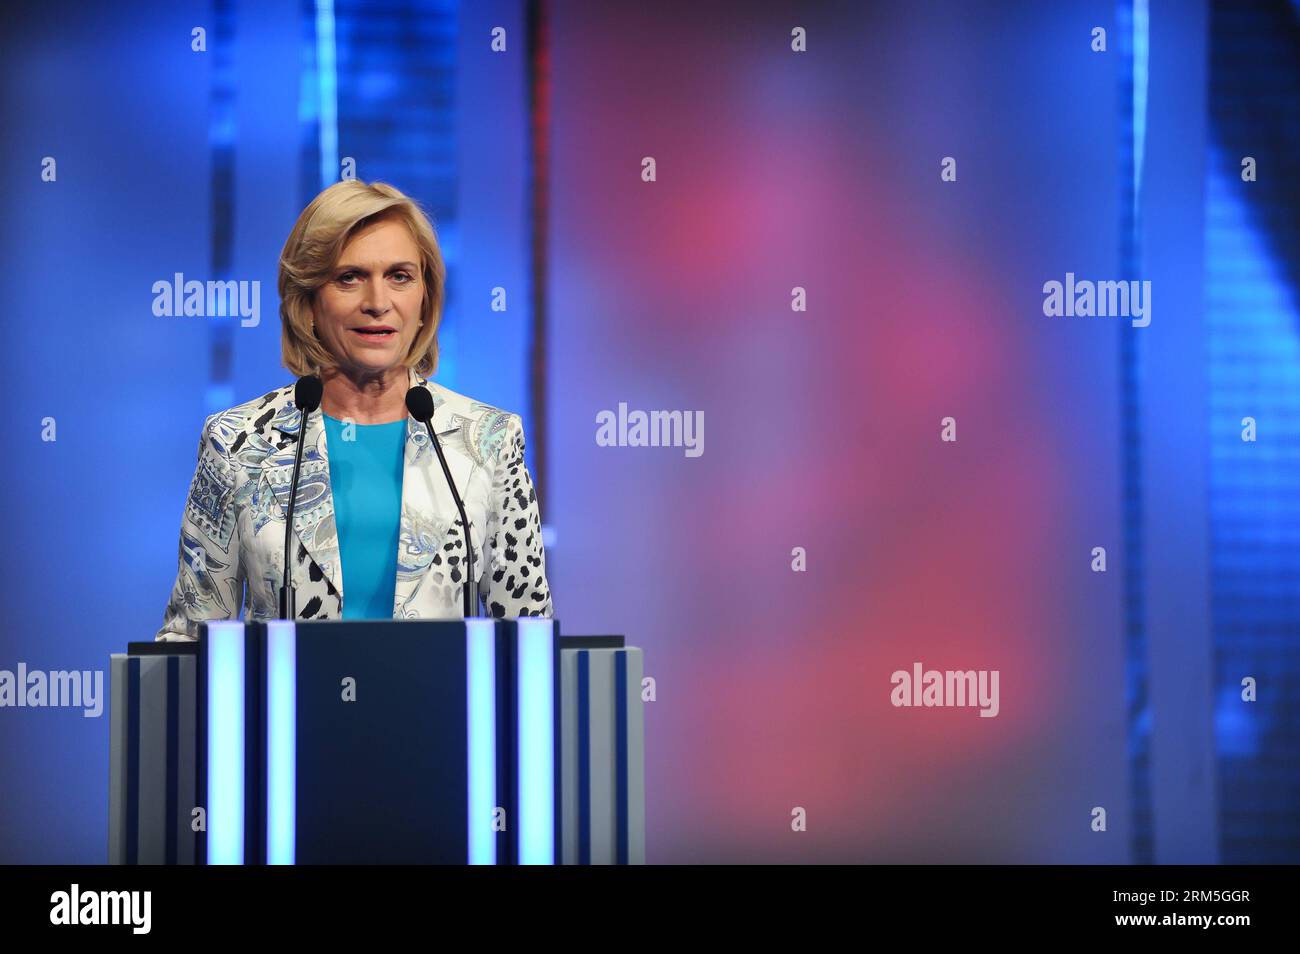 Bildnummer: 60655077  Datum: 29.10.2013  Copyright: imago/Xinhua SANTIAGO, Oct. 29, 2013 - Presidential candidate of the Alliance for Chile, and flagship of the ruling party Evelyn Matthei addresses a press conference after a television debate, in the facilities of TVN Channel, in Santiago, capital of Chile, on Oct. 29, 2013. The presidential election of Chile, for the 2014-2018 period, will take place on Nov. 17, 2013. (Xinhua/Jorge Villegas) (da) CHILE-SANTIAGO-POLITICS-DEBATE PUBLICATIONxNOTxINxCHN People Politik Fernsehduell TV Duell xsp x0x 2013 quer     60655077 Date 29 10 2013 Copyright Stock Photo